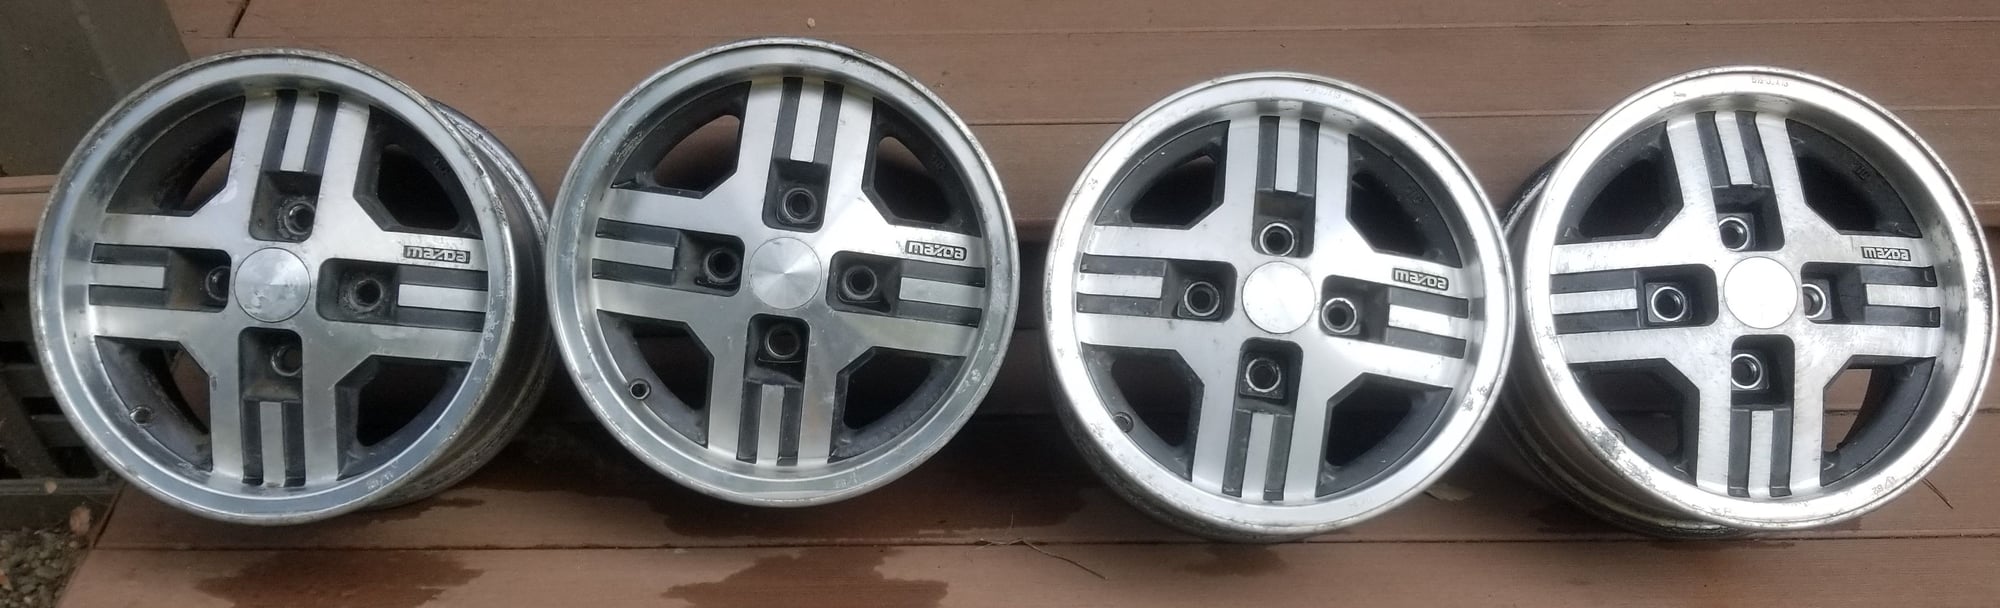 Wheels and Tires/Axles - 4 OEM Rims from 1983 RX-7 - Used - 1979 to 1985 Mazda RX-7 - Granite Bay, CA 95746, United States